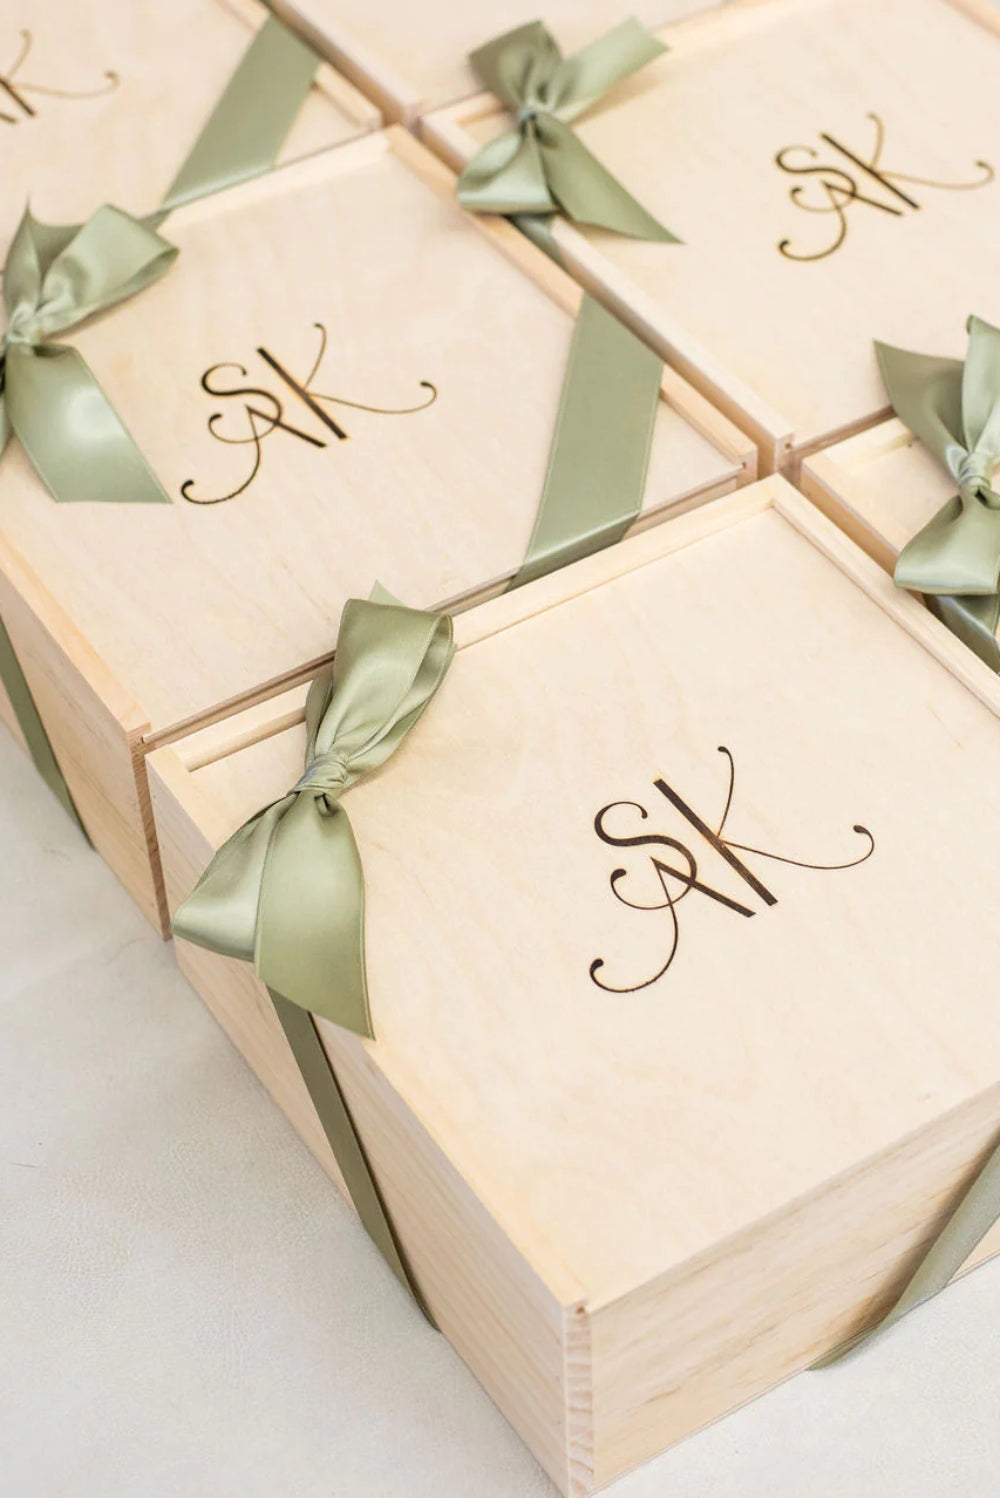 8 Best Wedding Gifts You Should Not Miss Out on This Wedding Season!